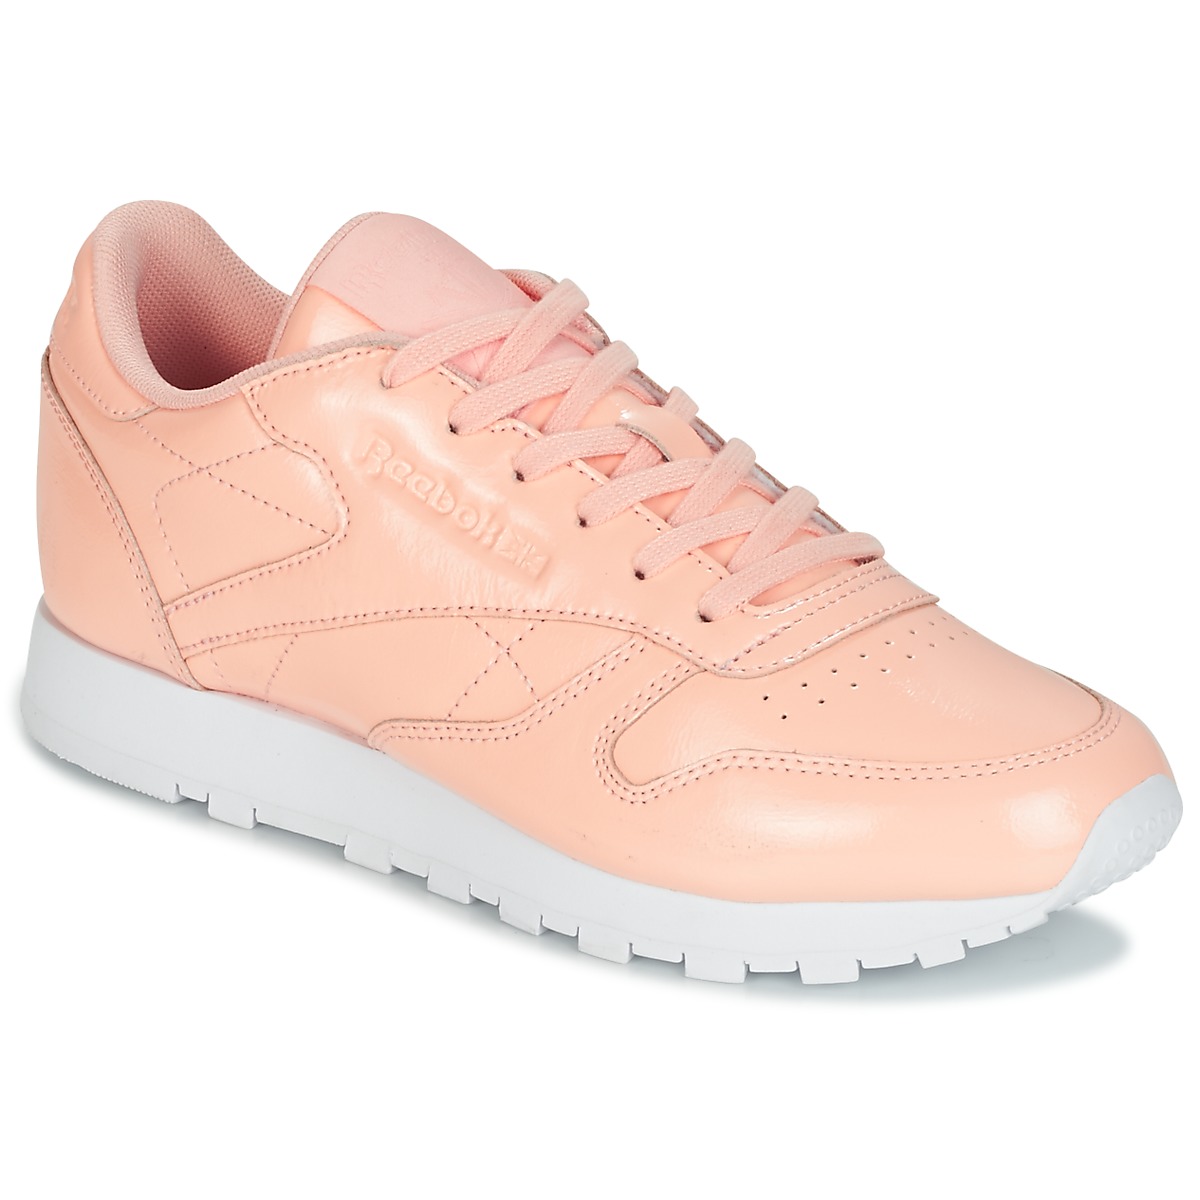 Sapatos Mulher Sapatilhas Reebok Classic CLASSIC LEATHER PATENT Rosa